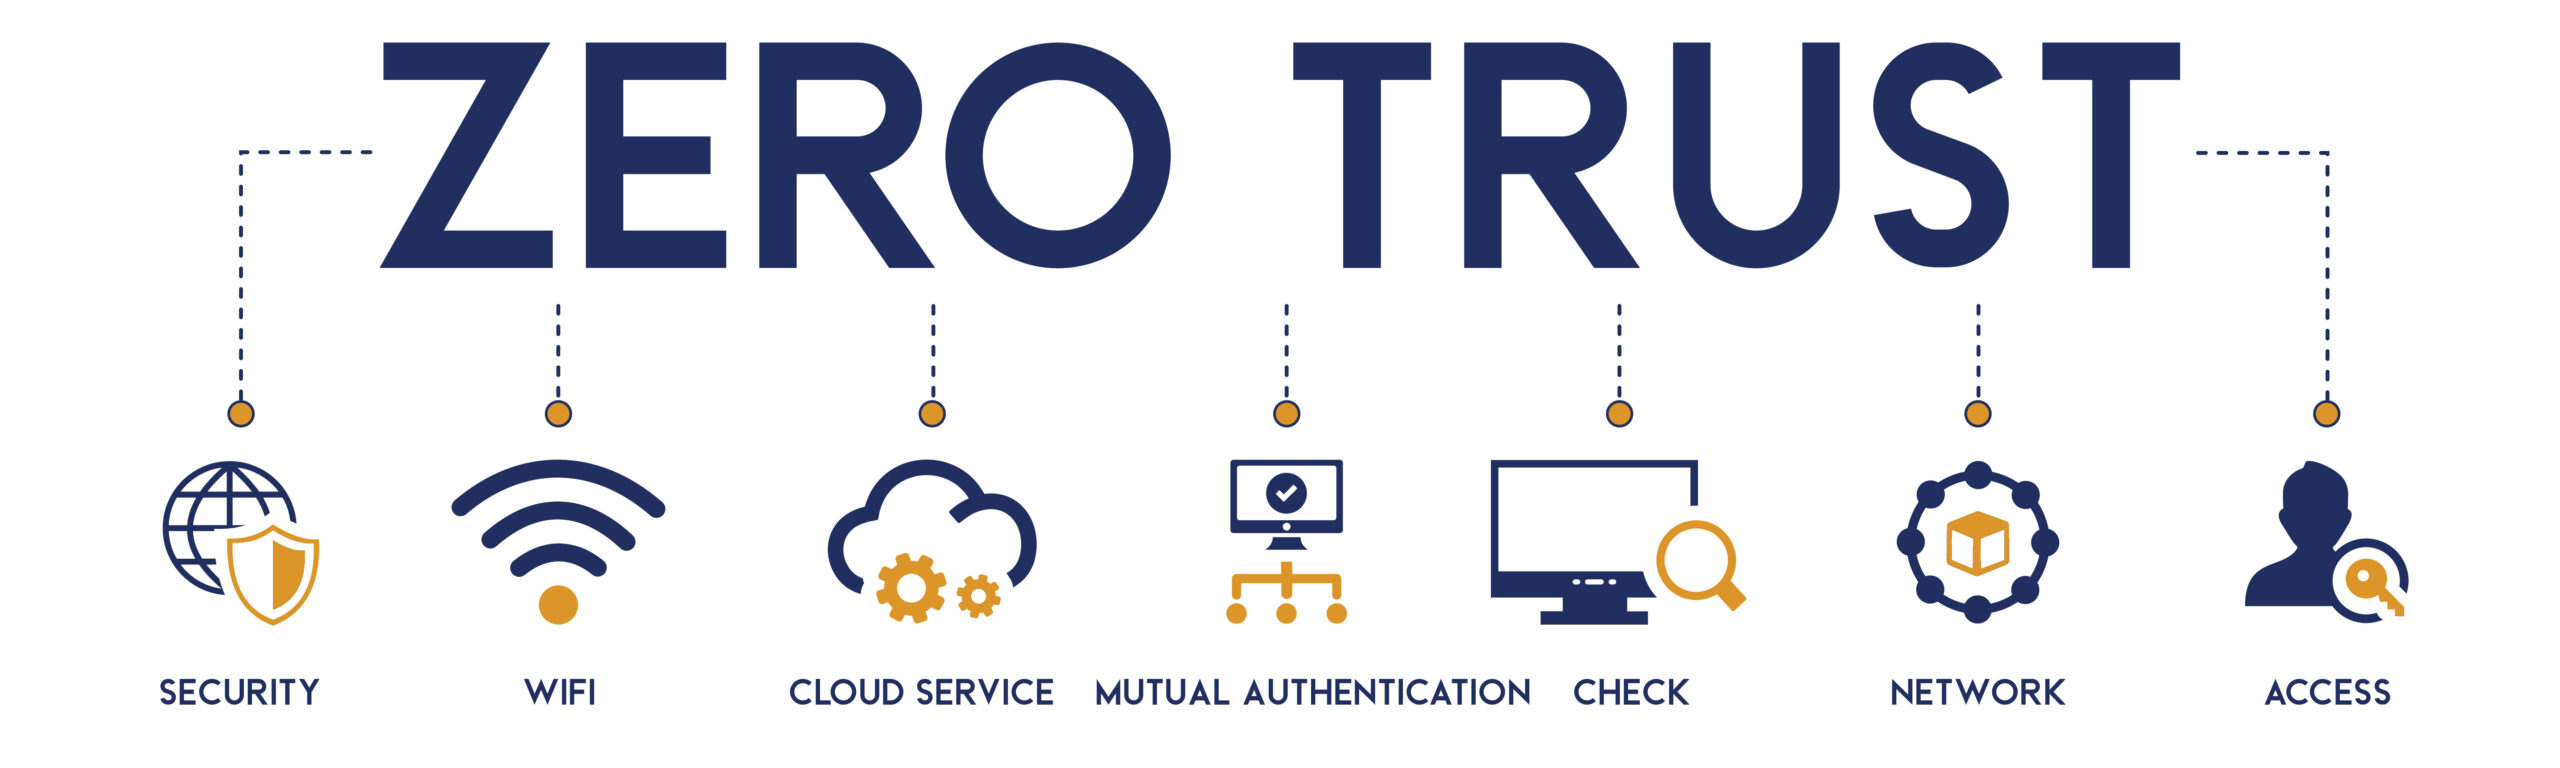 How to Create an Almost Perfect Zero Trust Architecture 